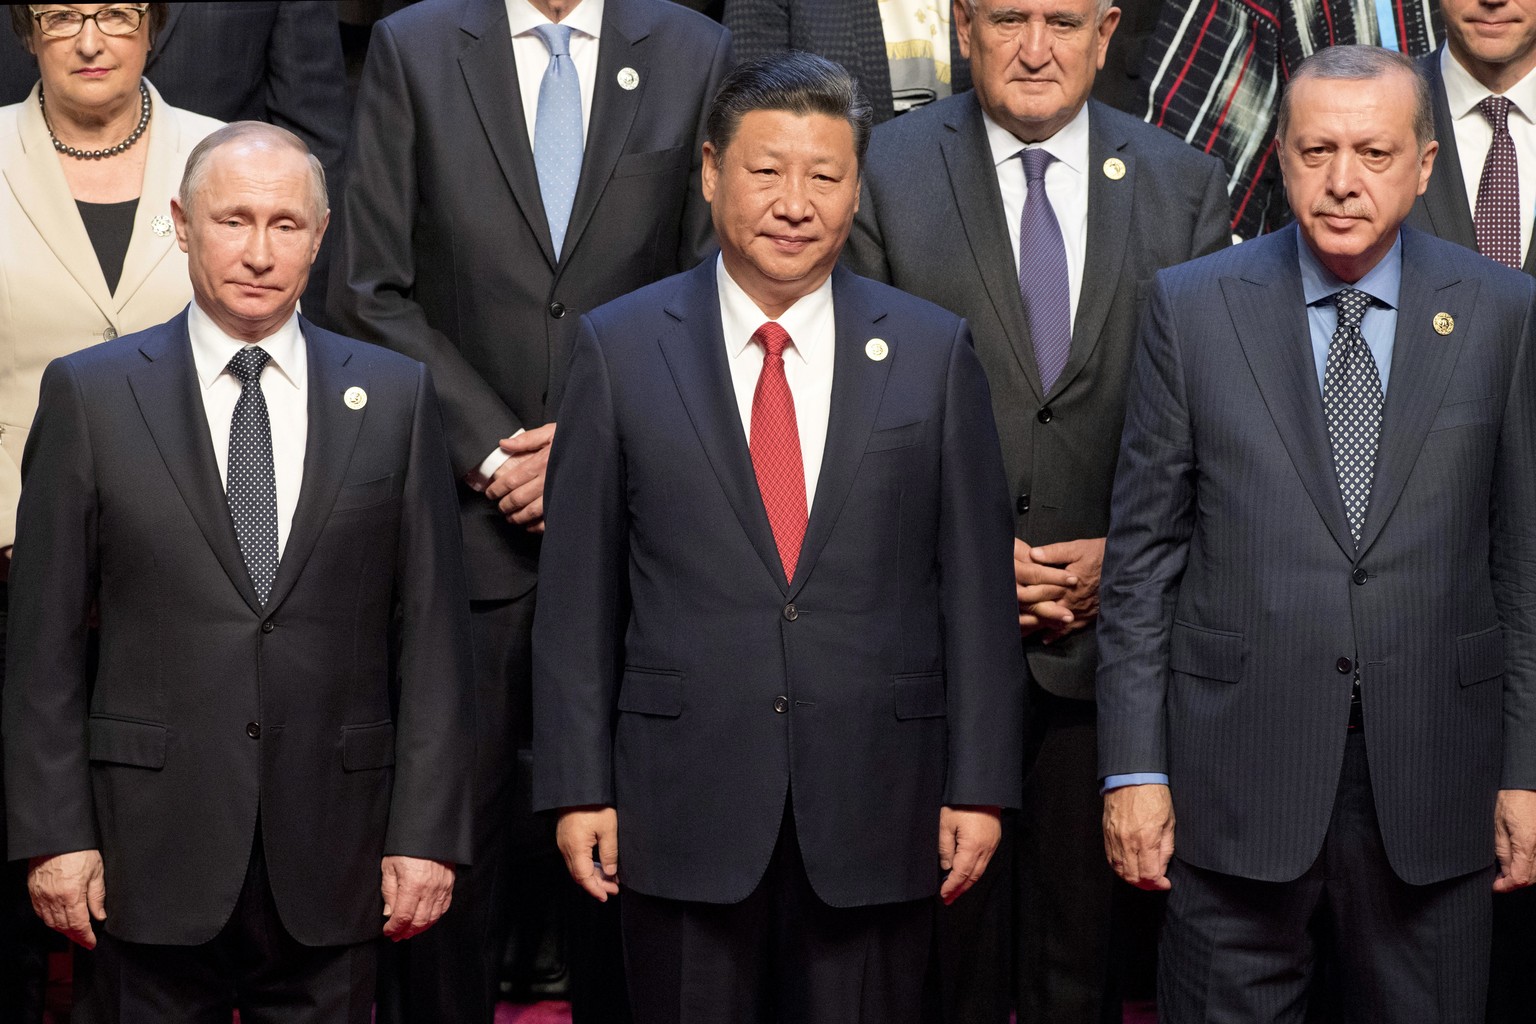 Chinese President Xi Jinping, center, stands with Russian President Vladimir Putin, left, Turkish President Recep Tayyip Erdogan, right, and other leaders to pose for a group photo prior to the openin ...